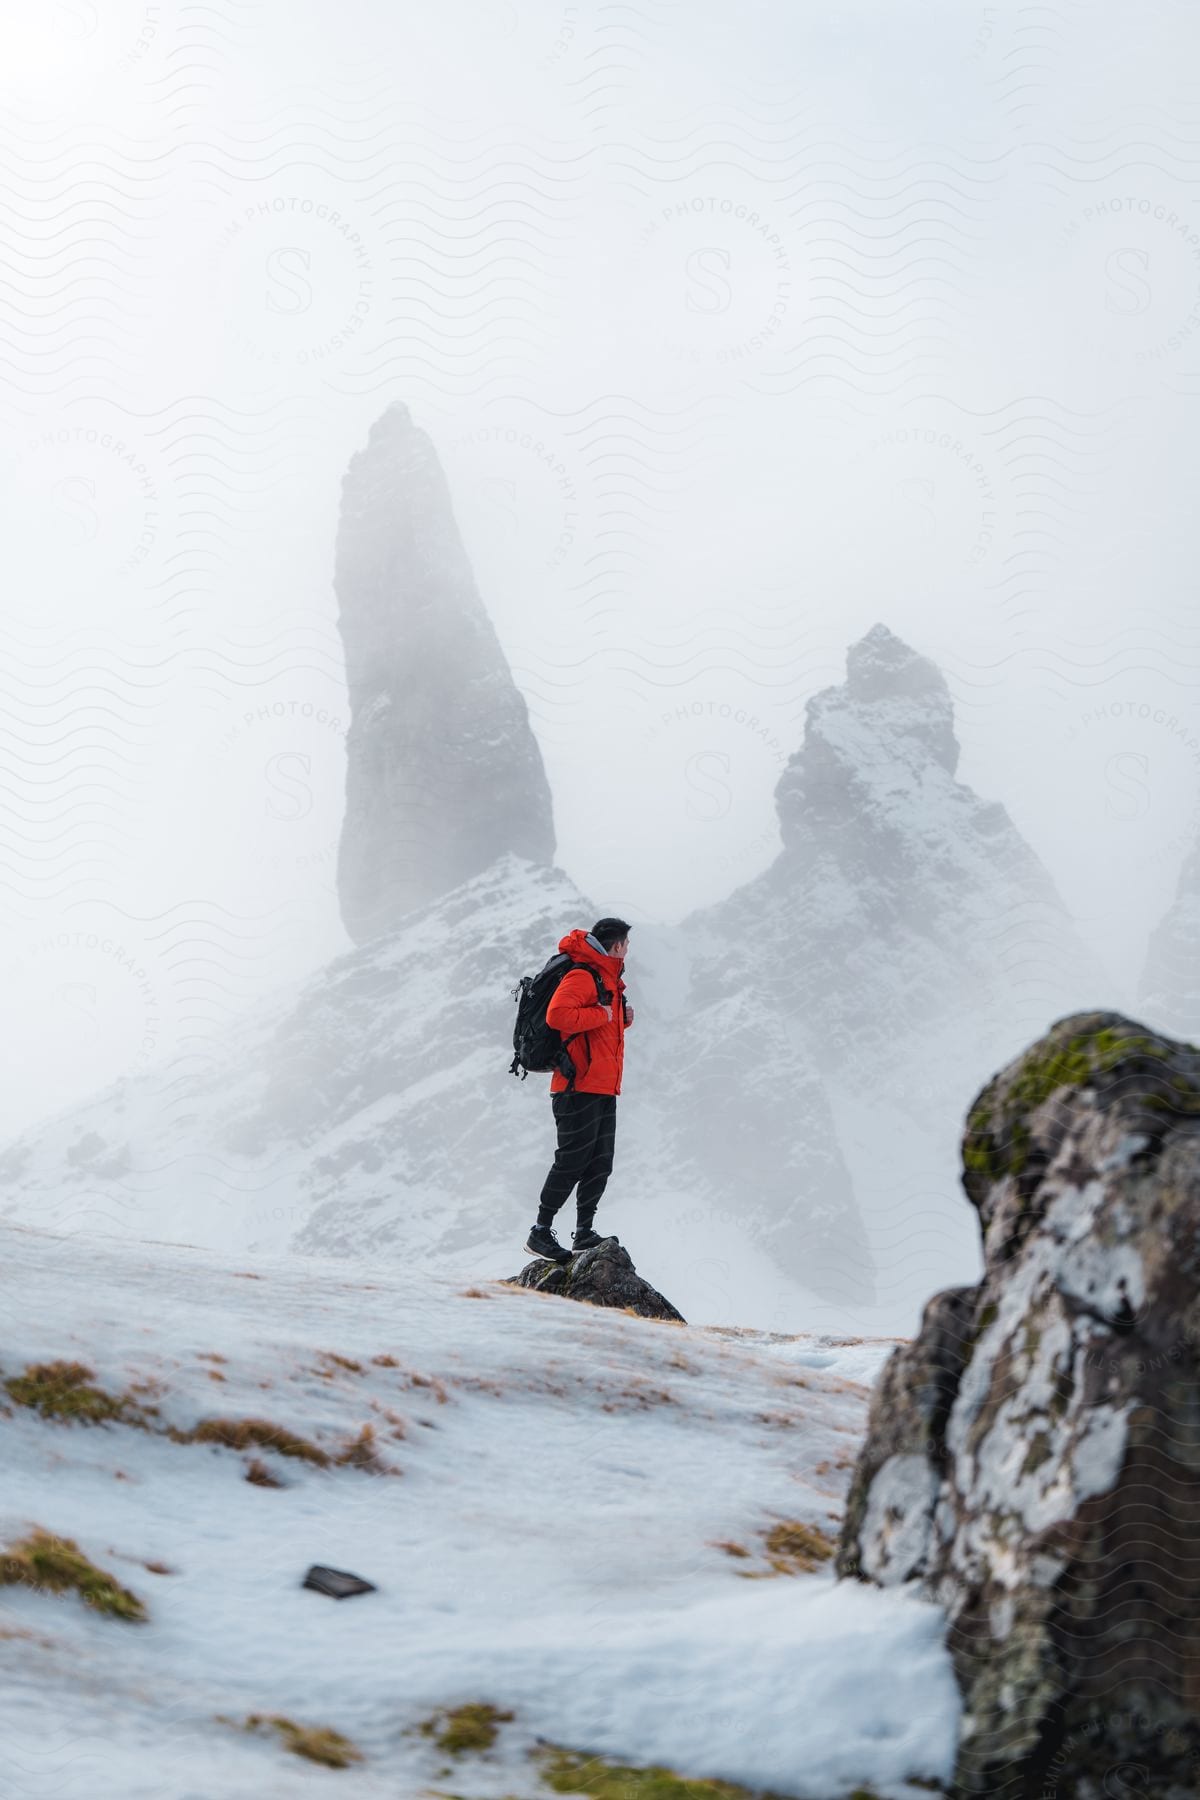 A hiker stands on a snowcovered mountainside near tall rock formations wearing a backpack